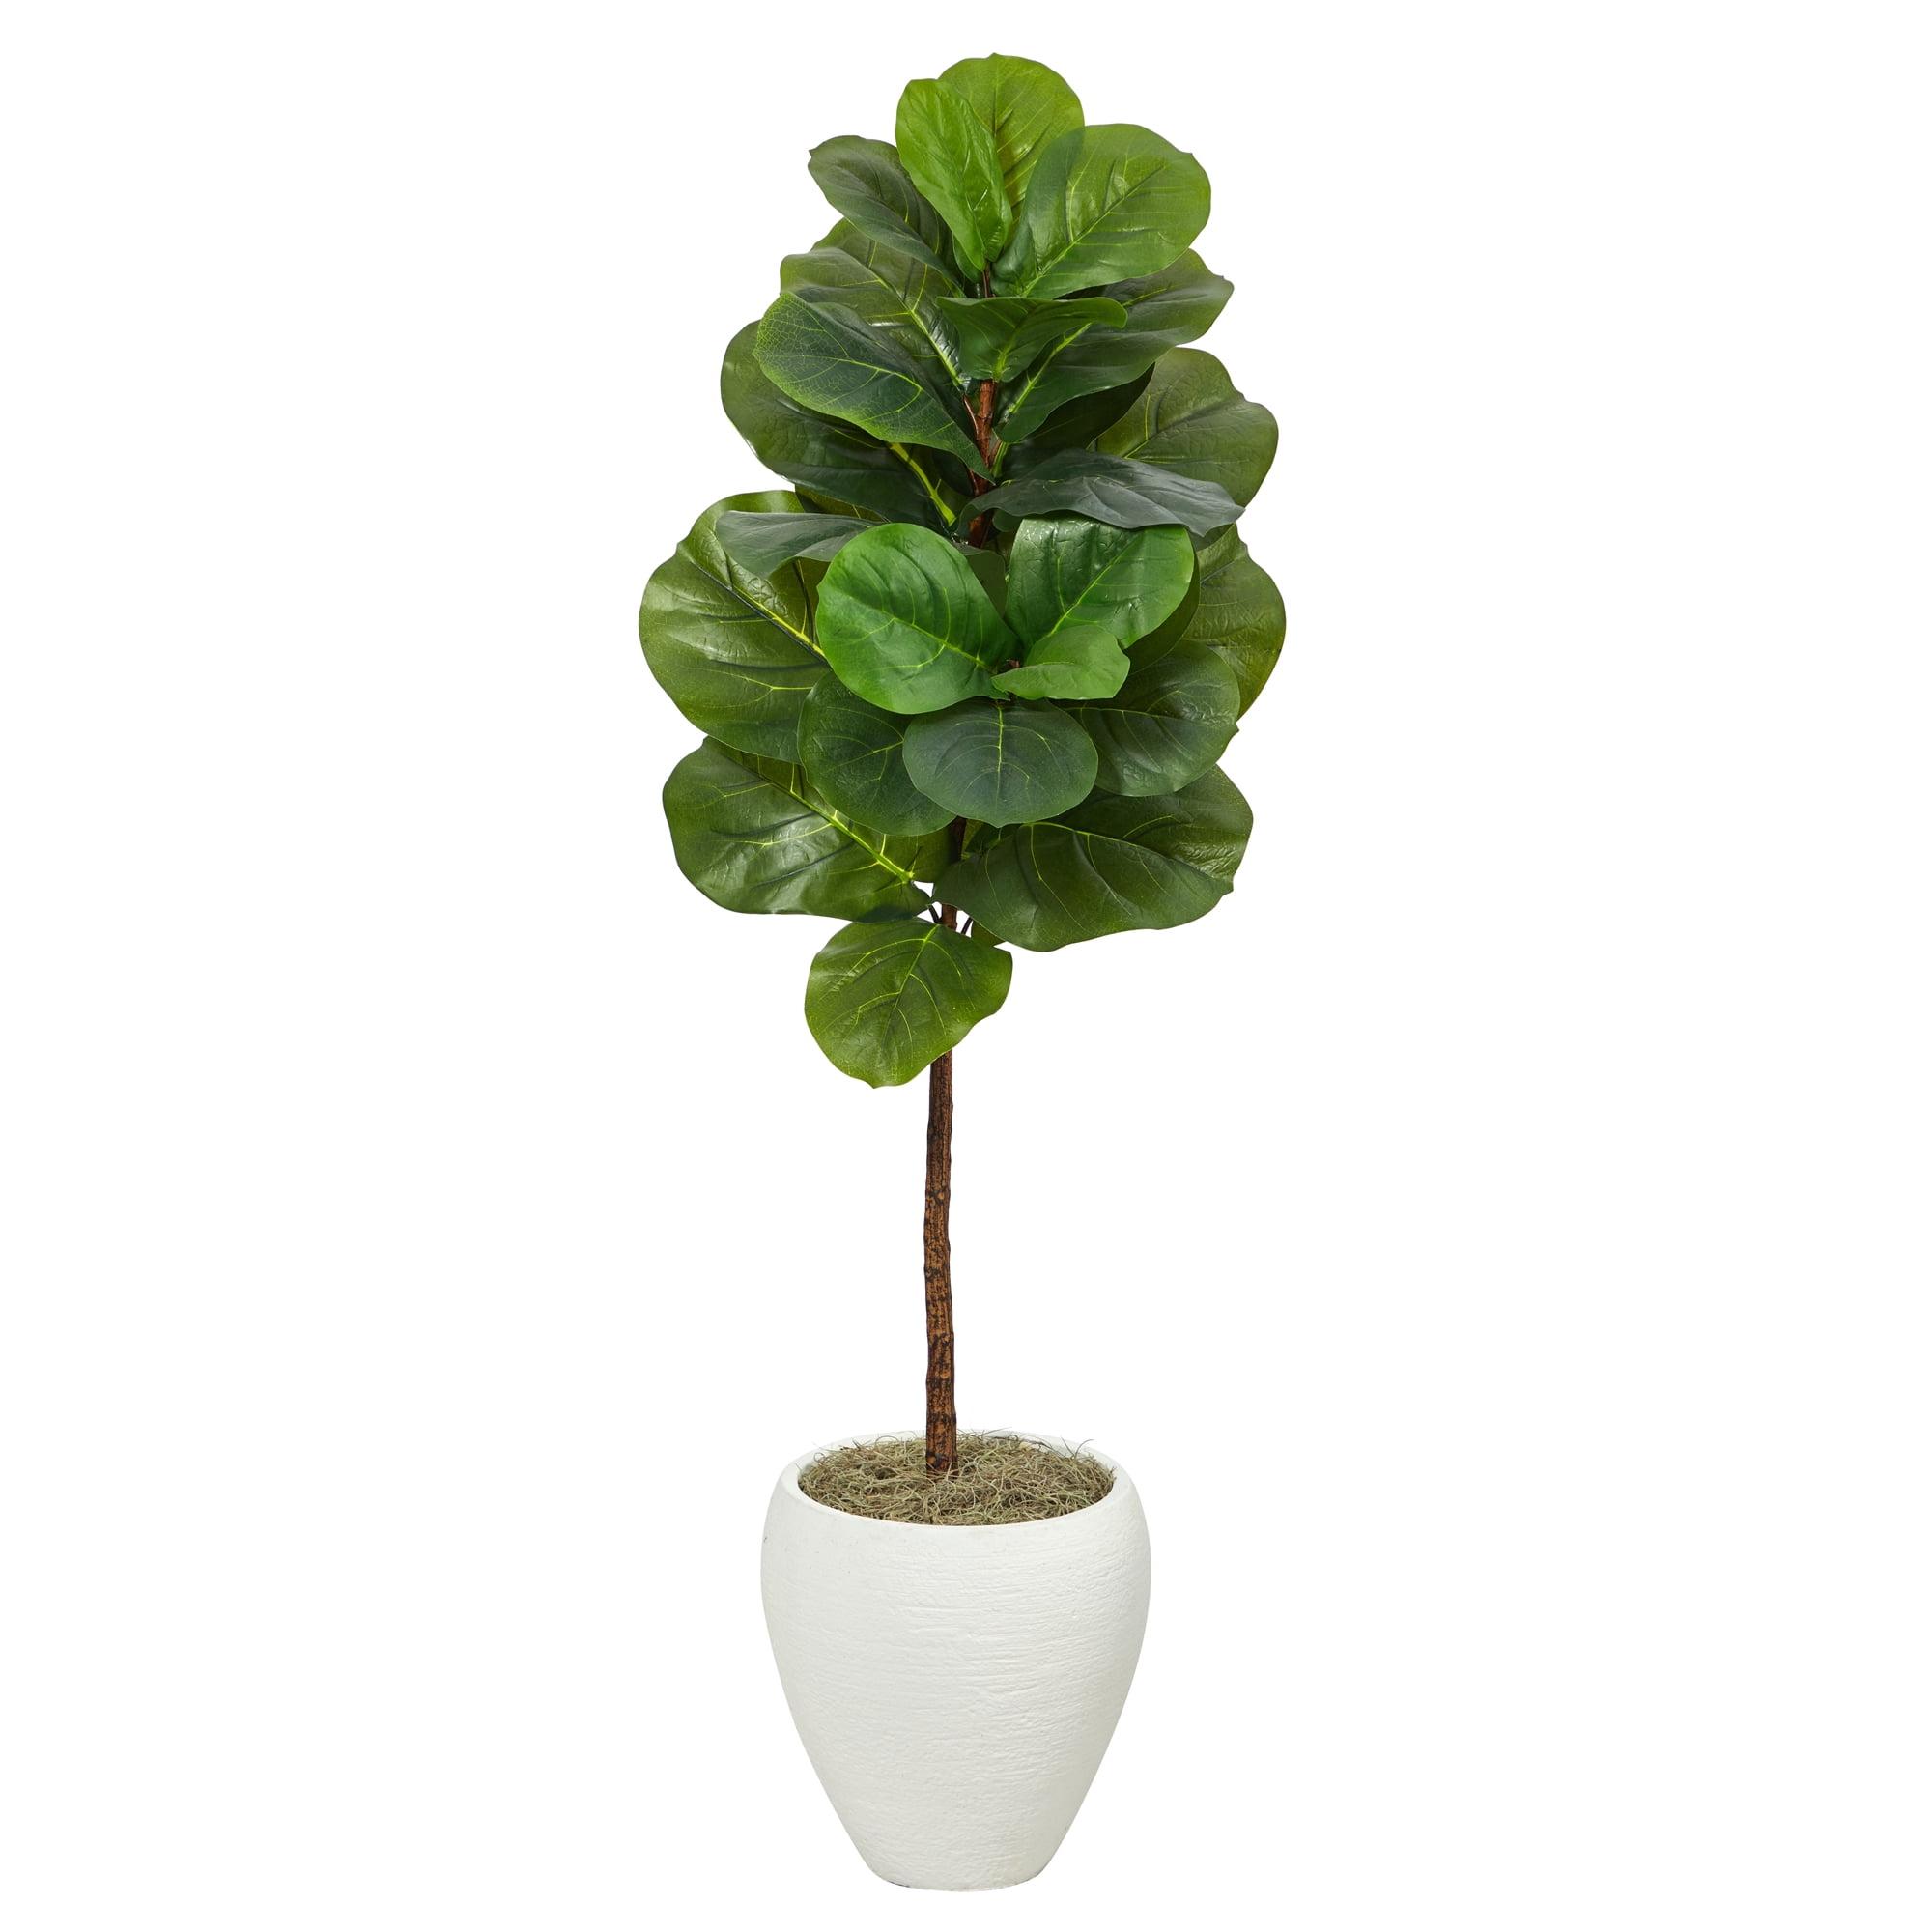 Lush Green 56" Fiddle Leaf Fig Artificial Tree in White Planter